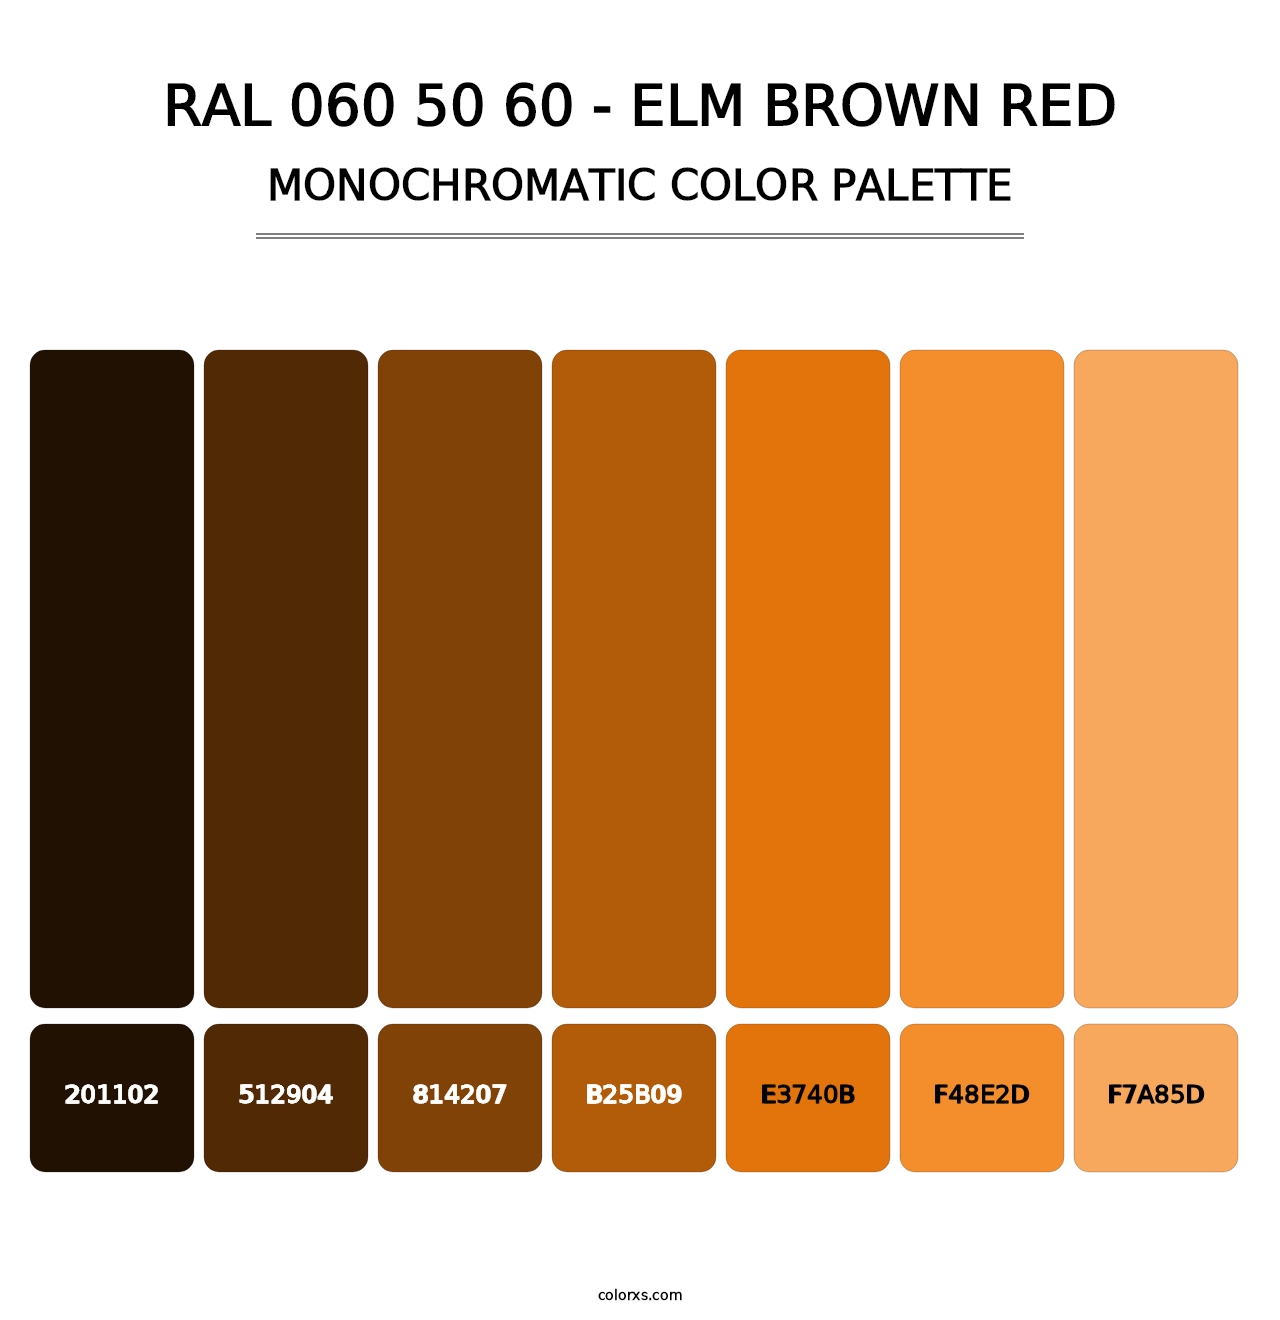 RAL 060 50 60 - Elm Brown Red - Monochromatic Color Palette